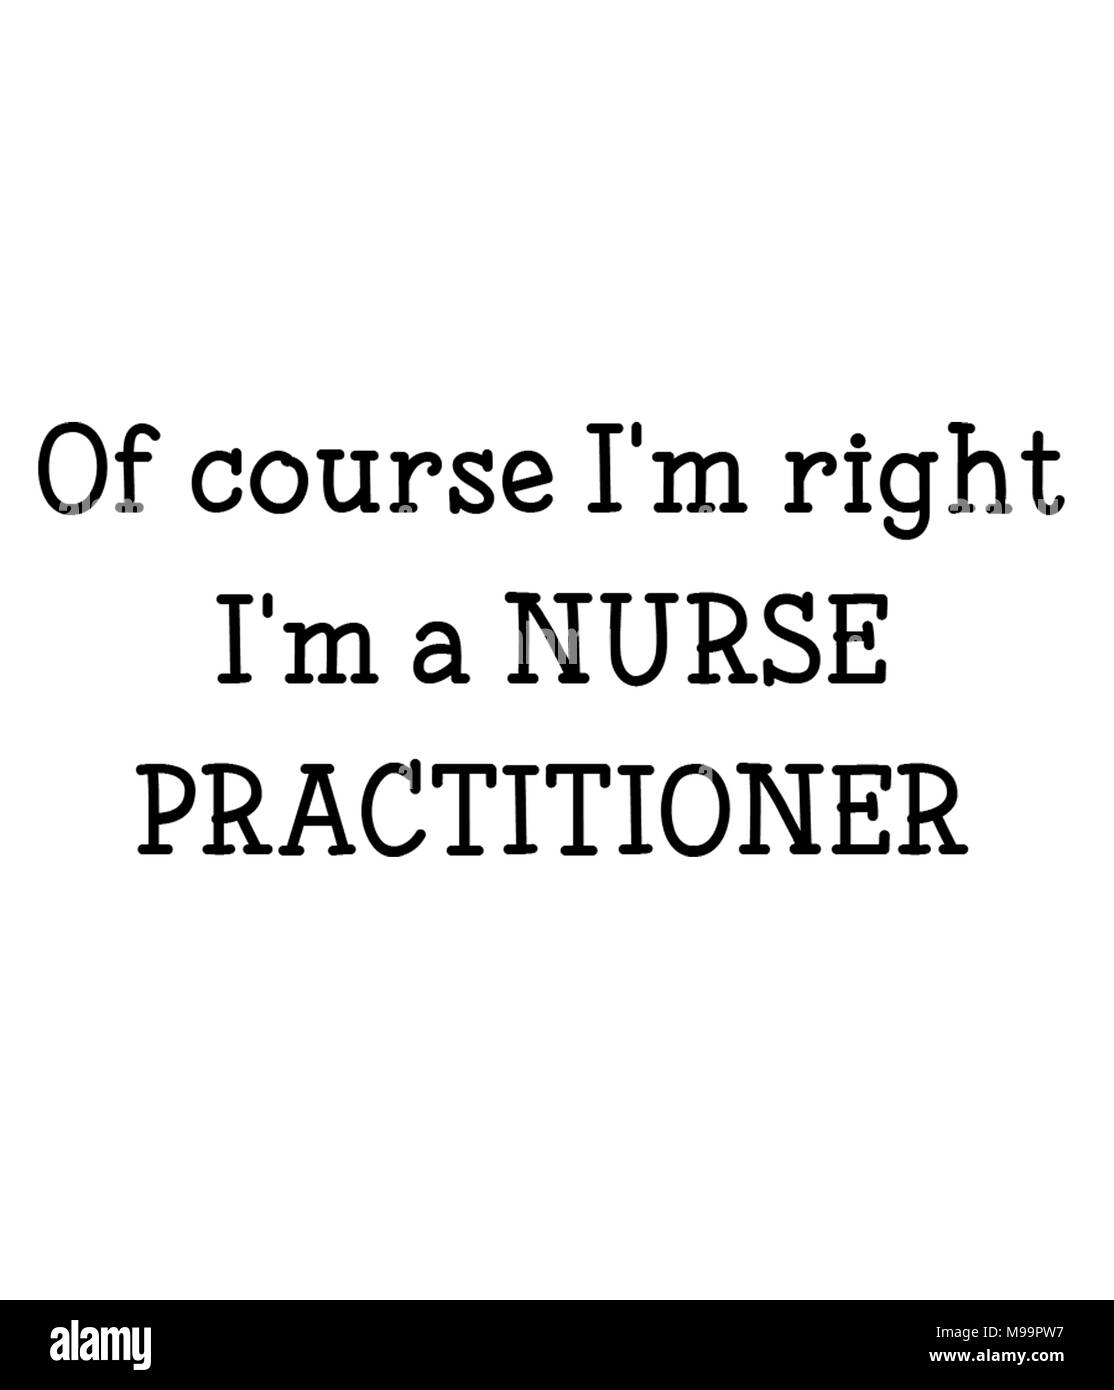 Of course I'm right I'm a NURSE PRACTITIONER Stock Photo